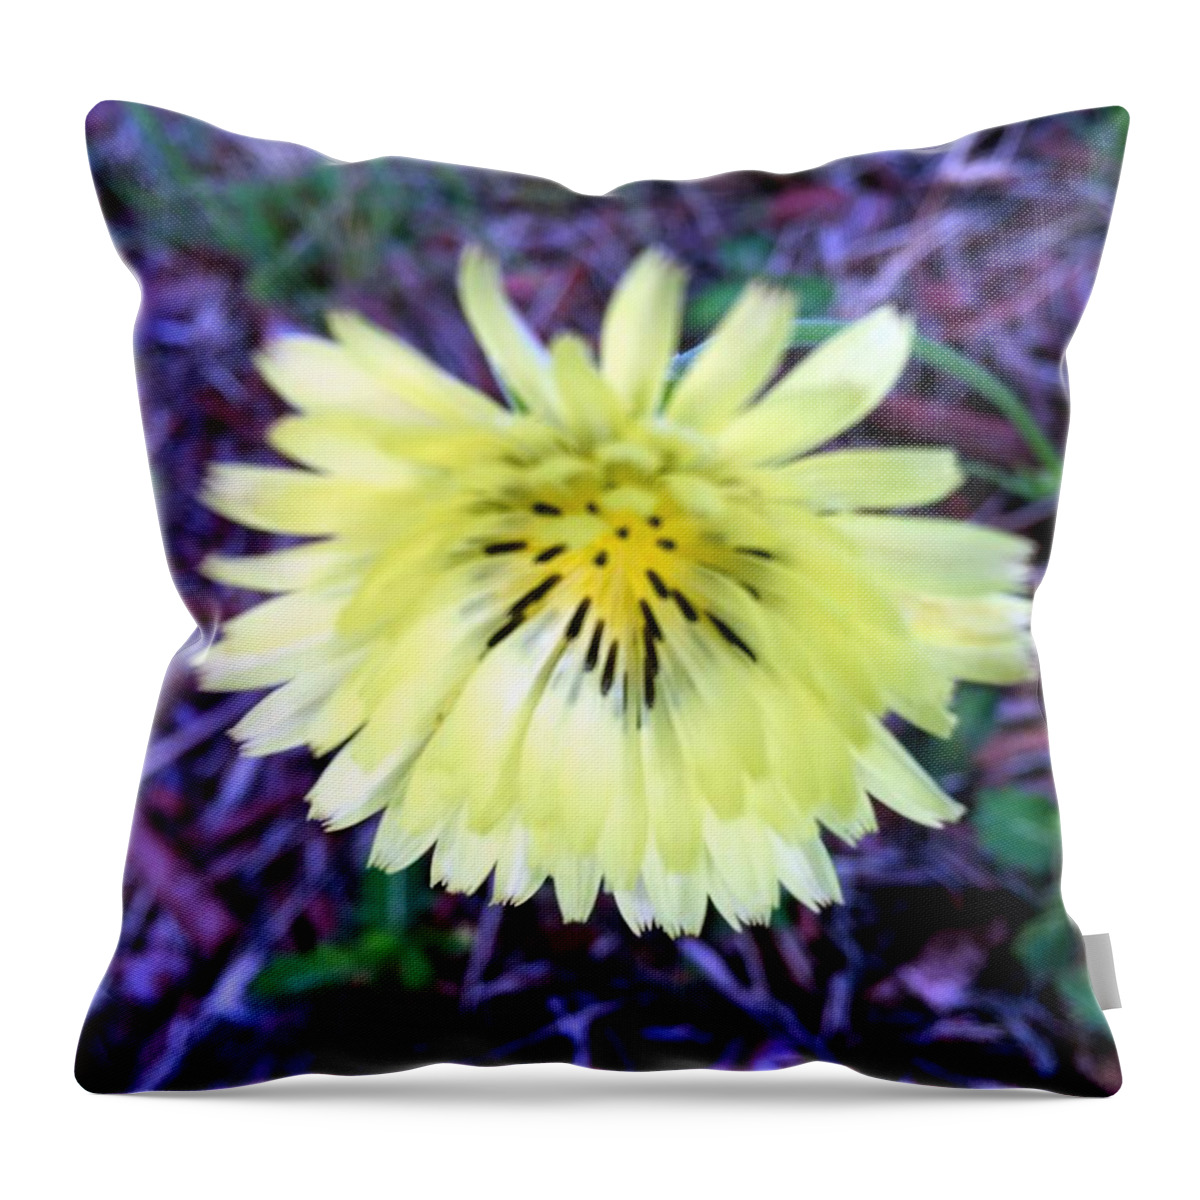 Dandelion Throw Pillow featuring the photograph A Simple Dandelion by Marian Lonzetta